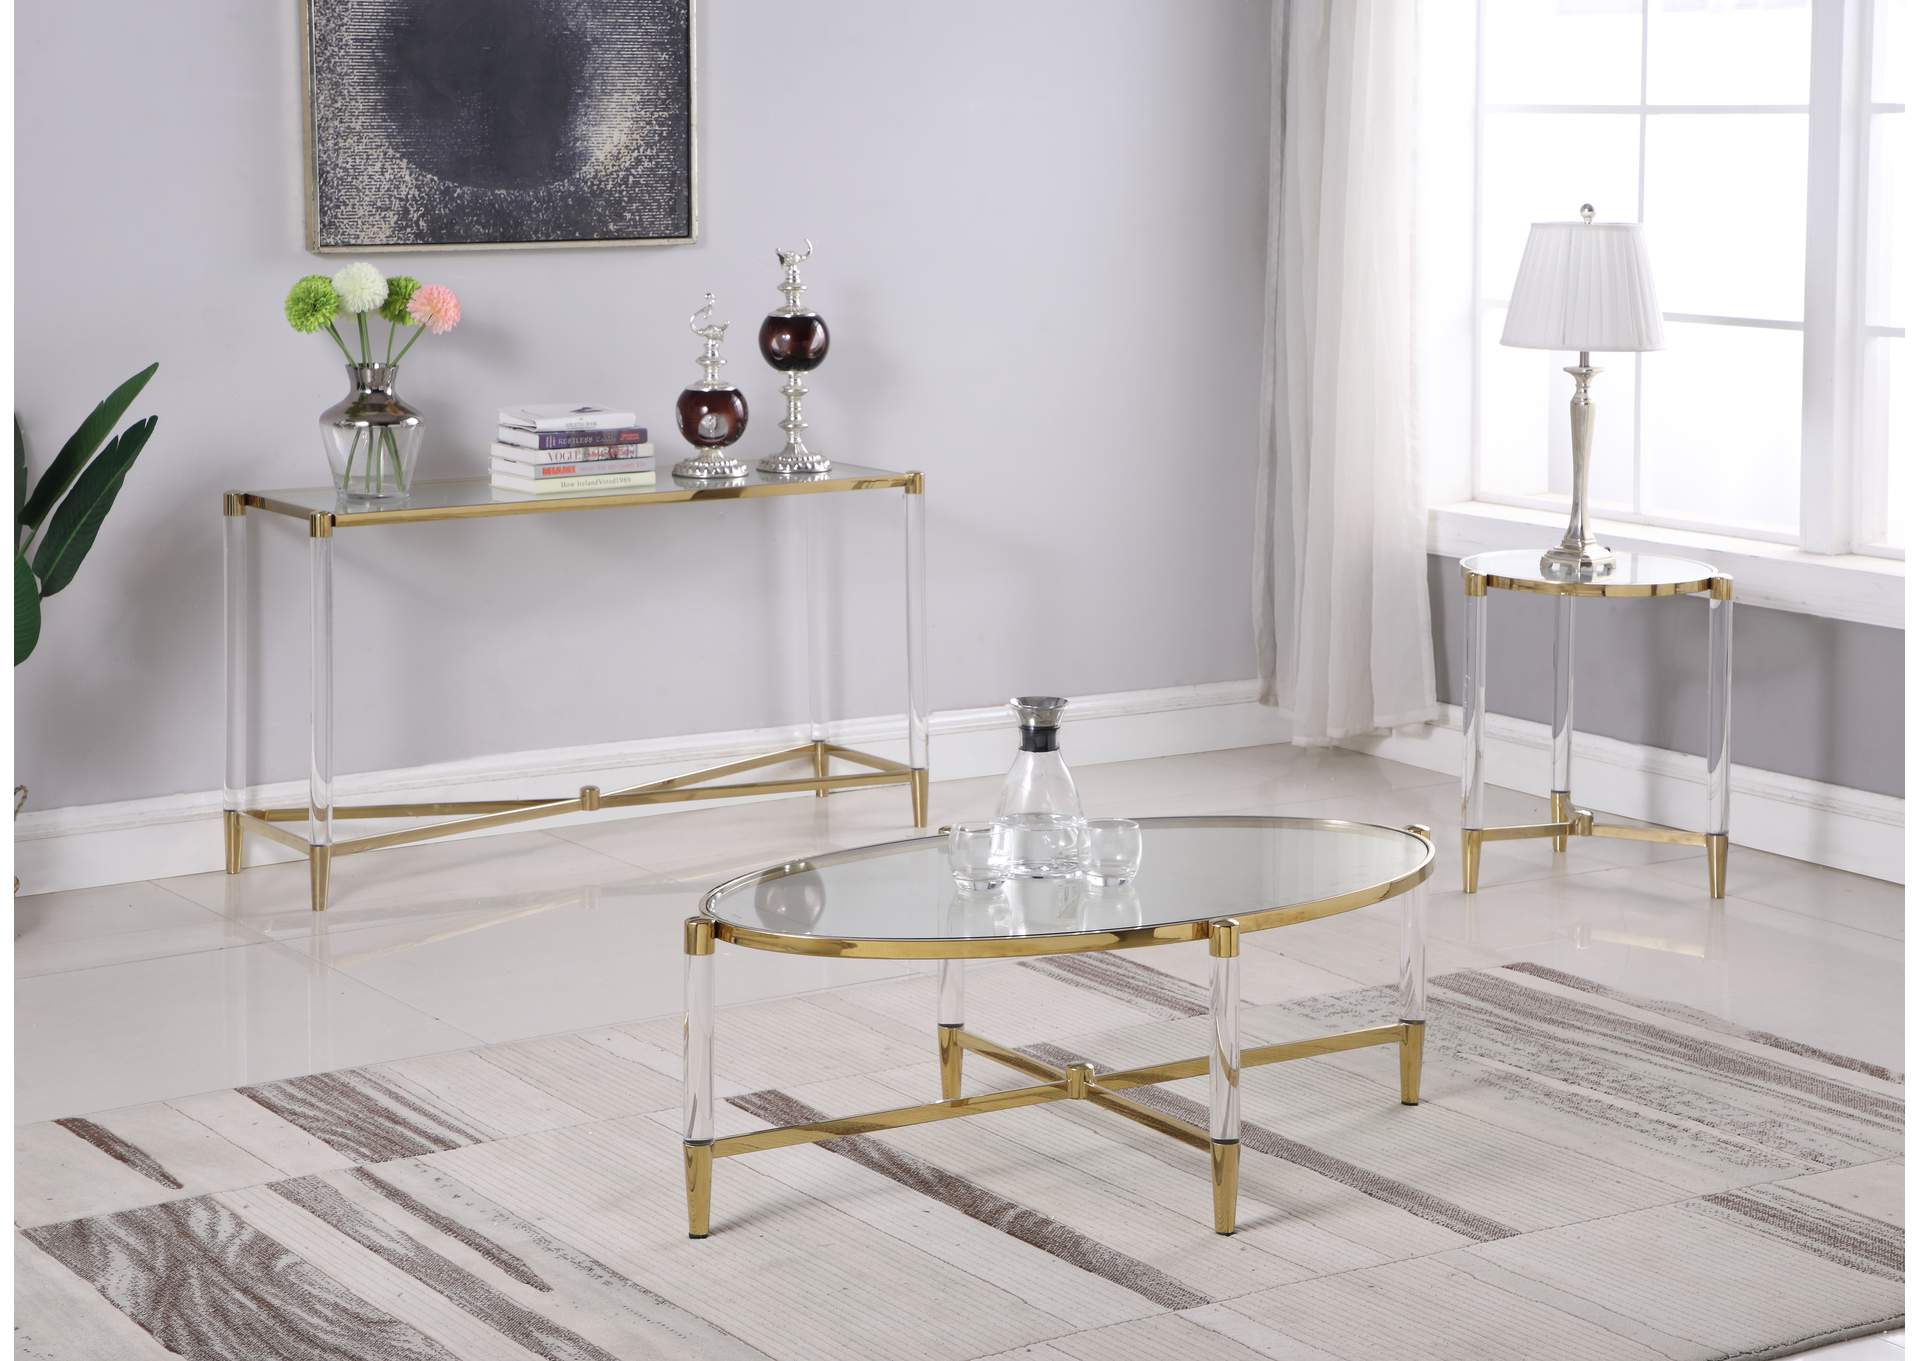 Denali Brass Oval Tempered Glass Cocktail Table,Chintaly Imports